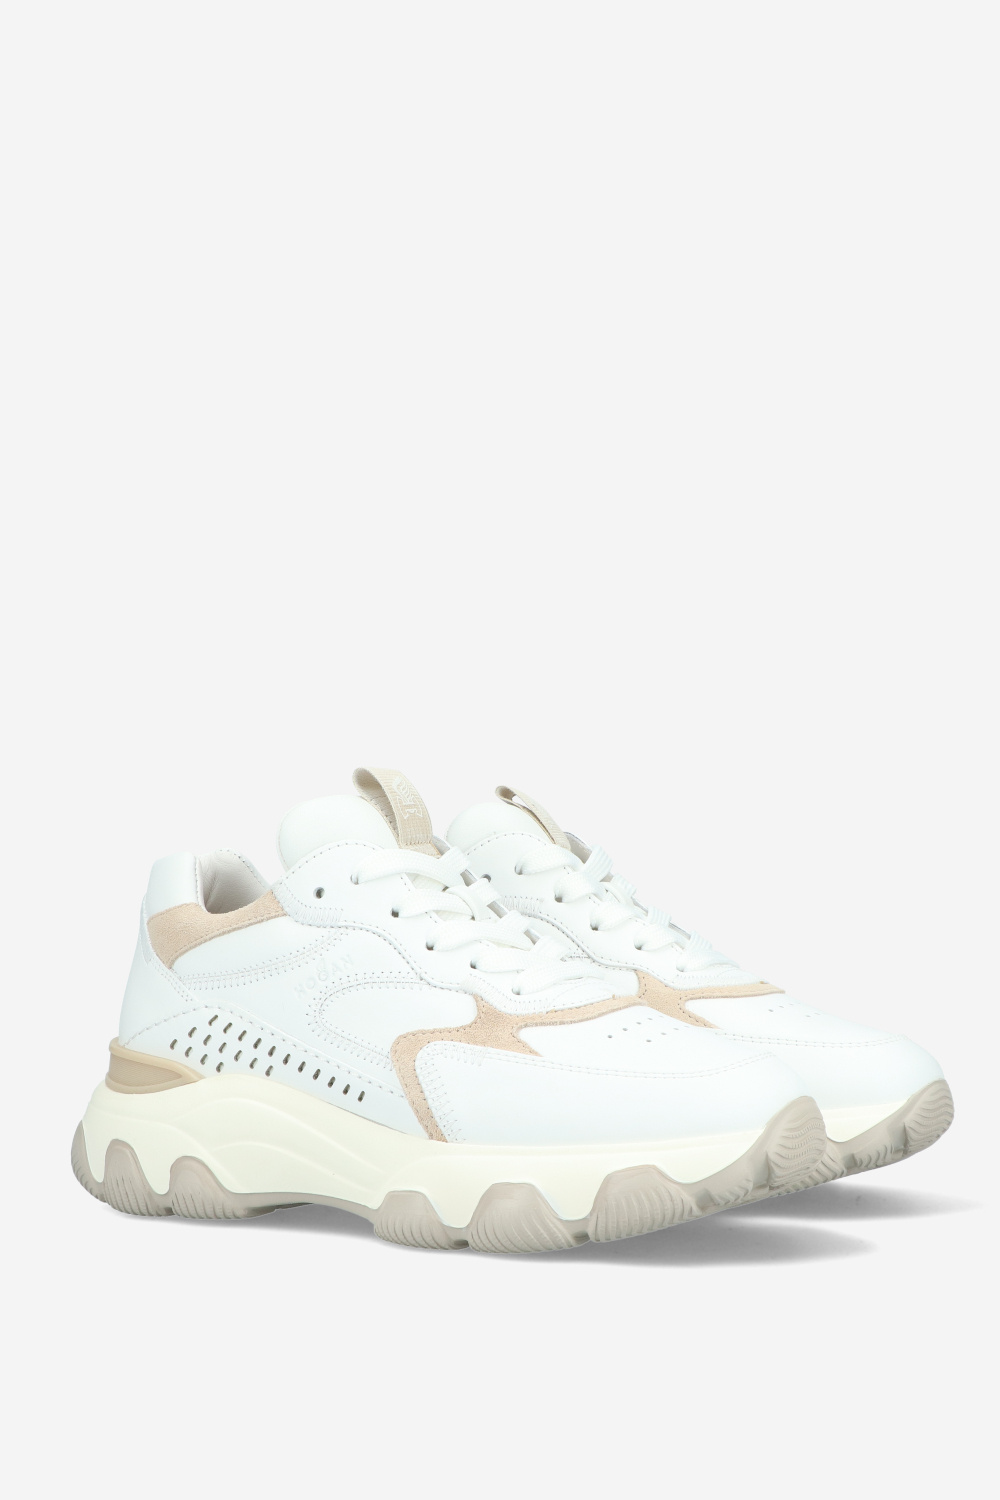 Hogan Hyperactive leather sneakers - White